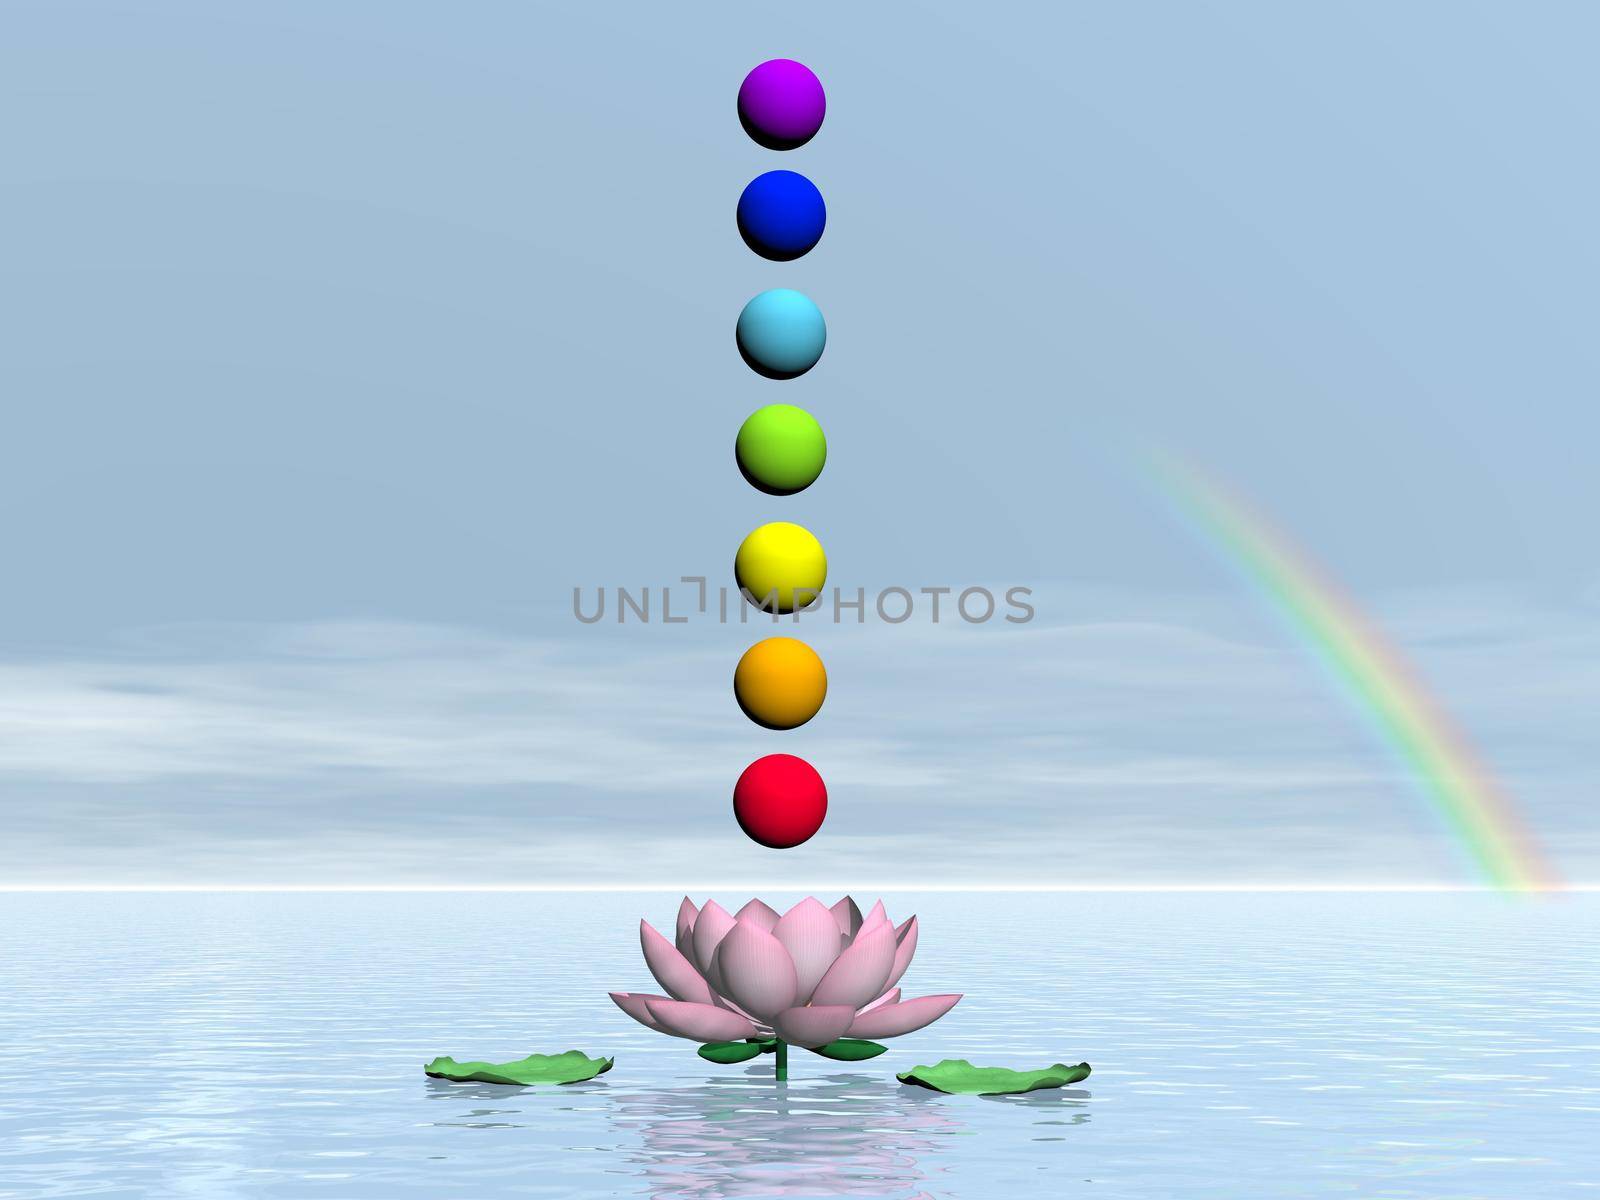 Colorful spheres for chakras upon beautiful lily flower and water by day with rainbow